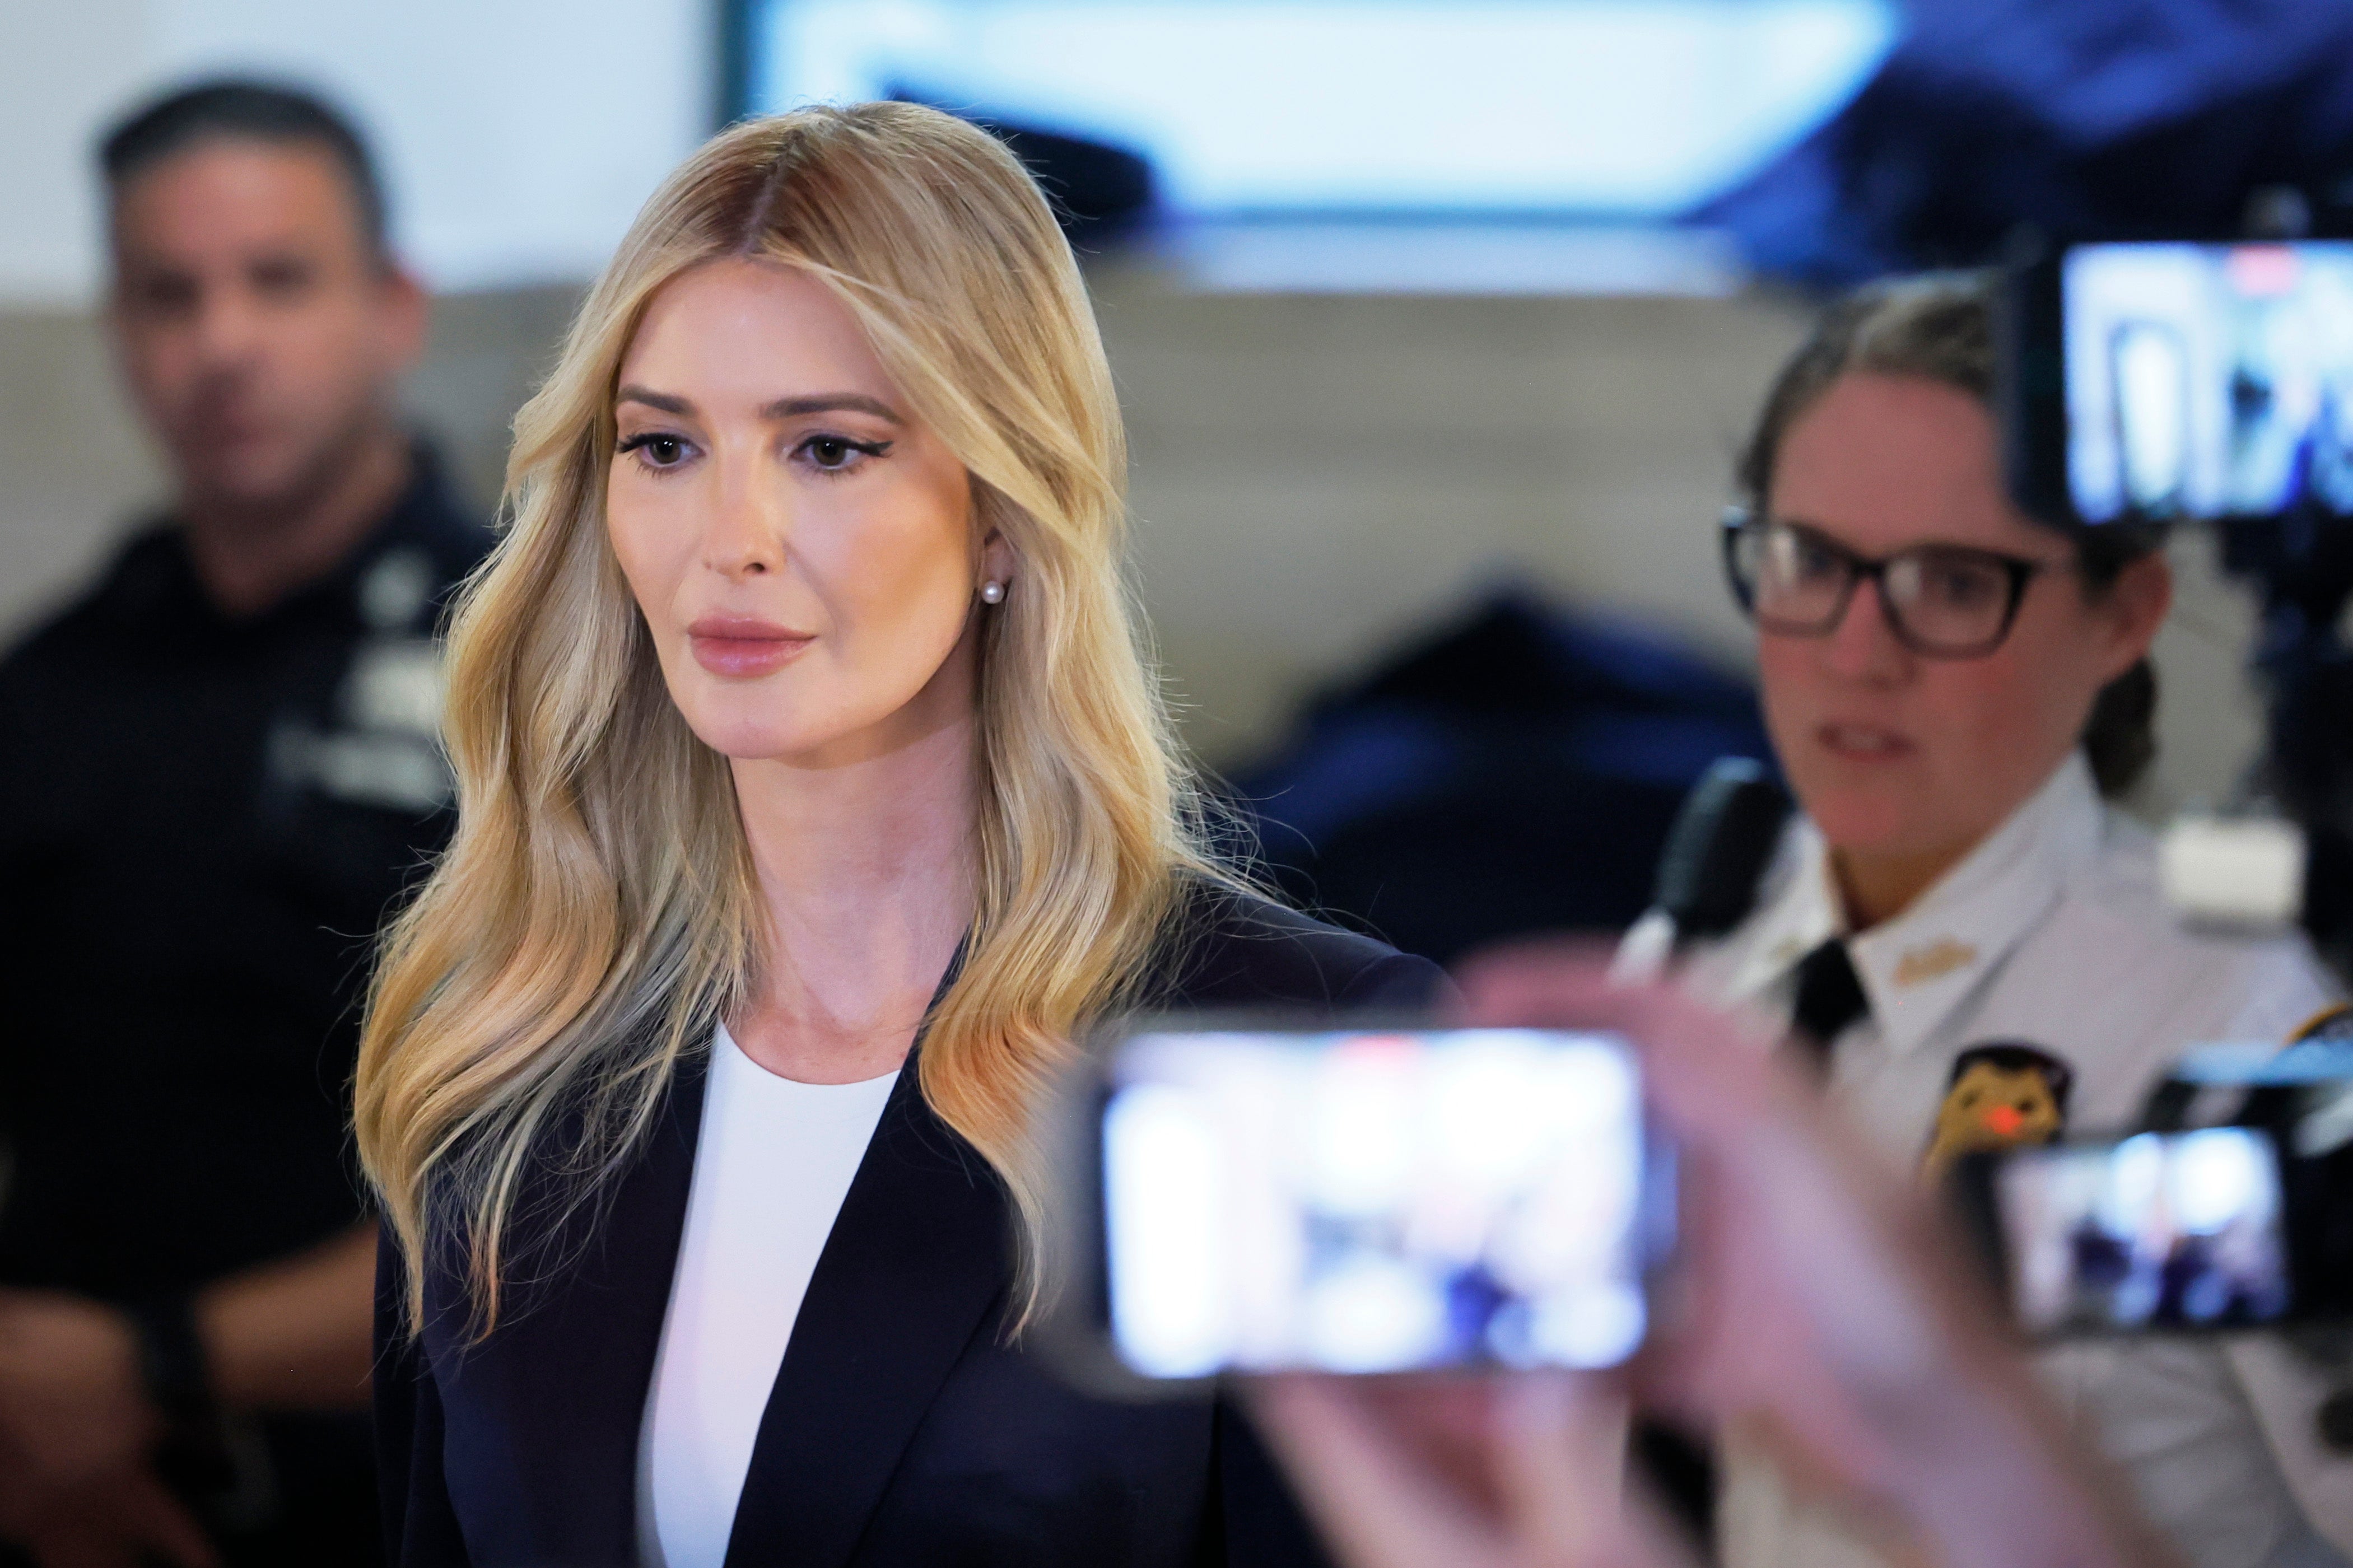 Ivanka Trump returns to the courtroom Wednesday to continue her testimony after a break in a trial targeting her family’s business